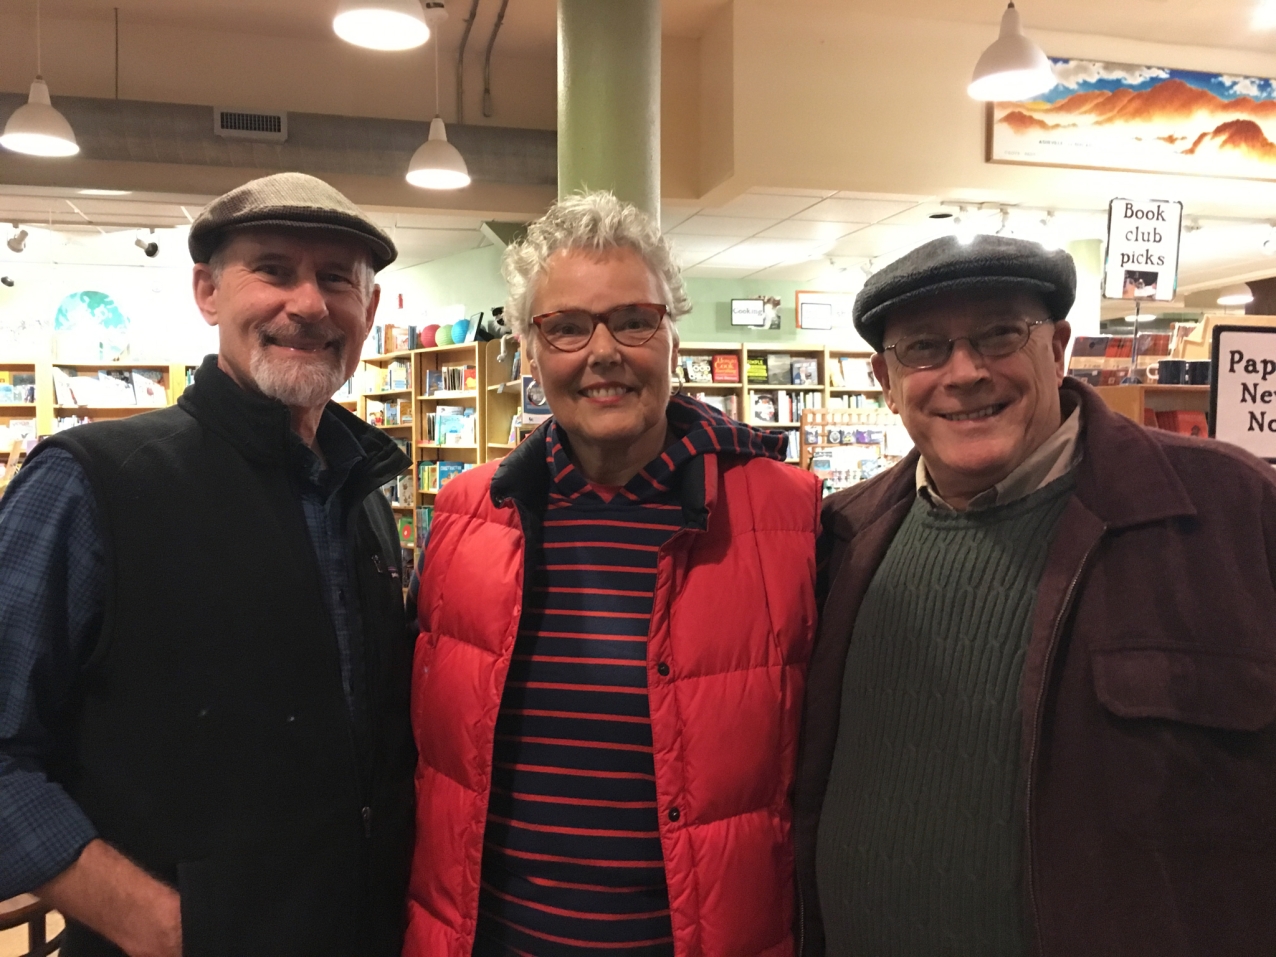 Chris with fellow author Robin Gaiser and Andy Reed